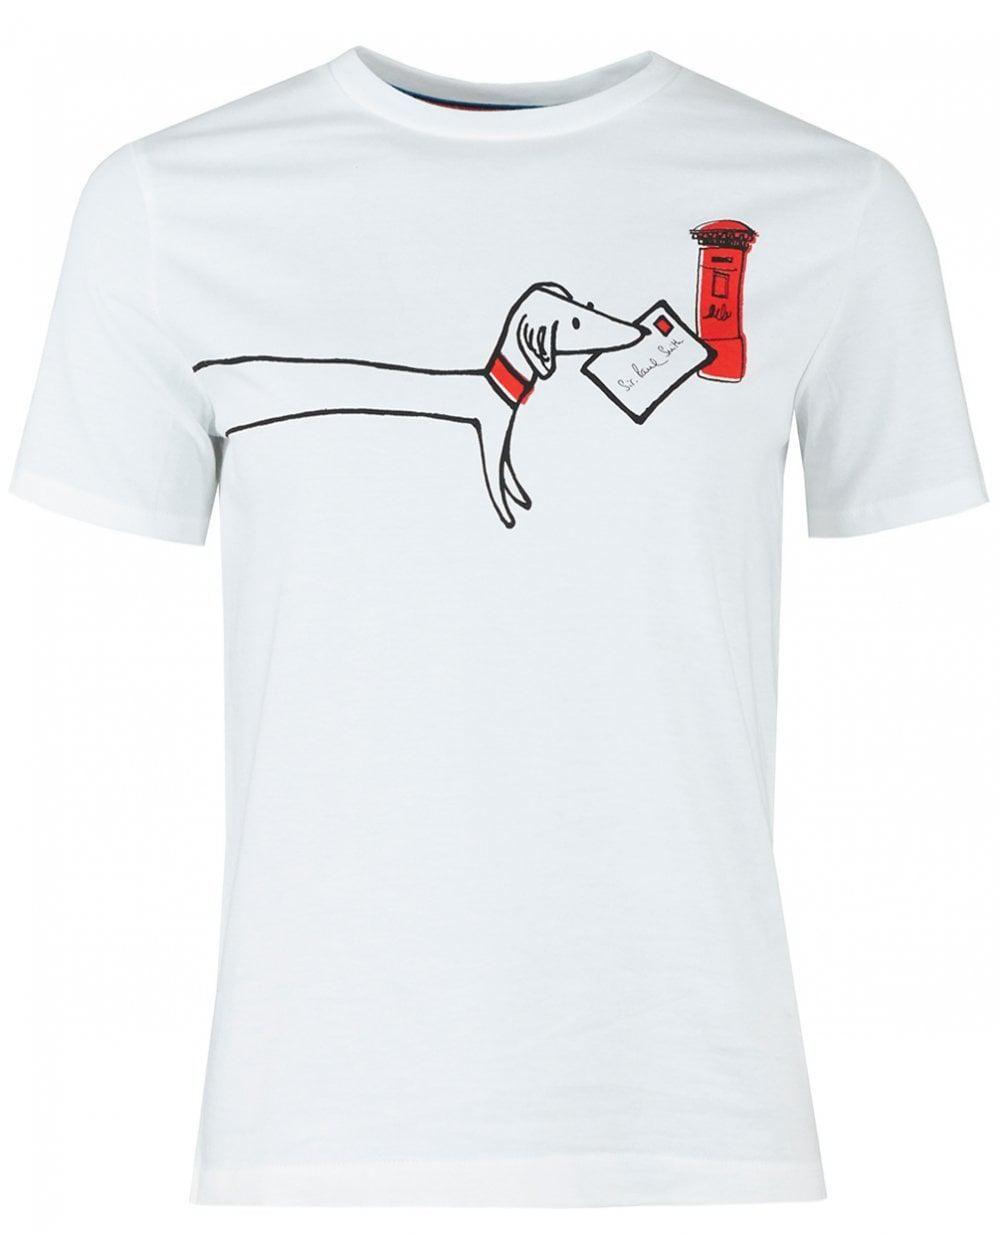 Dog Print Logo - Ps By Paul Smith Dog Print Logo in White - Save 1.818181818181813 ...